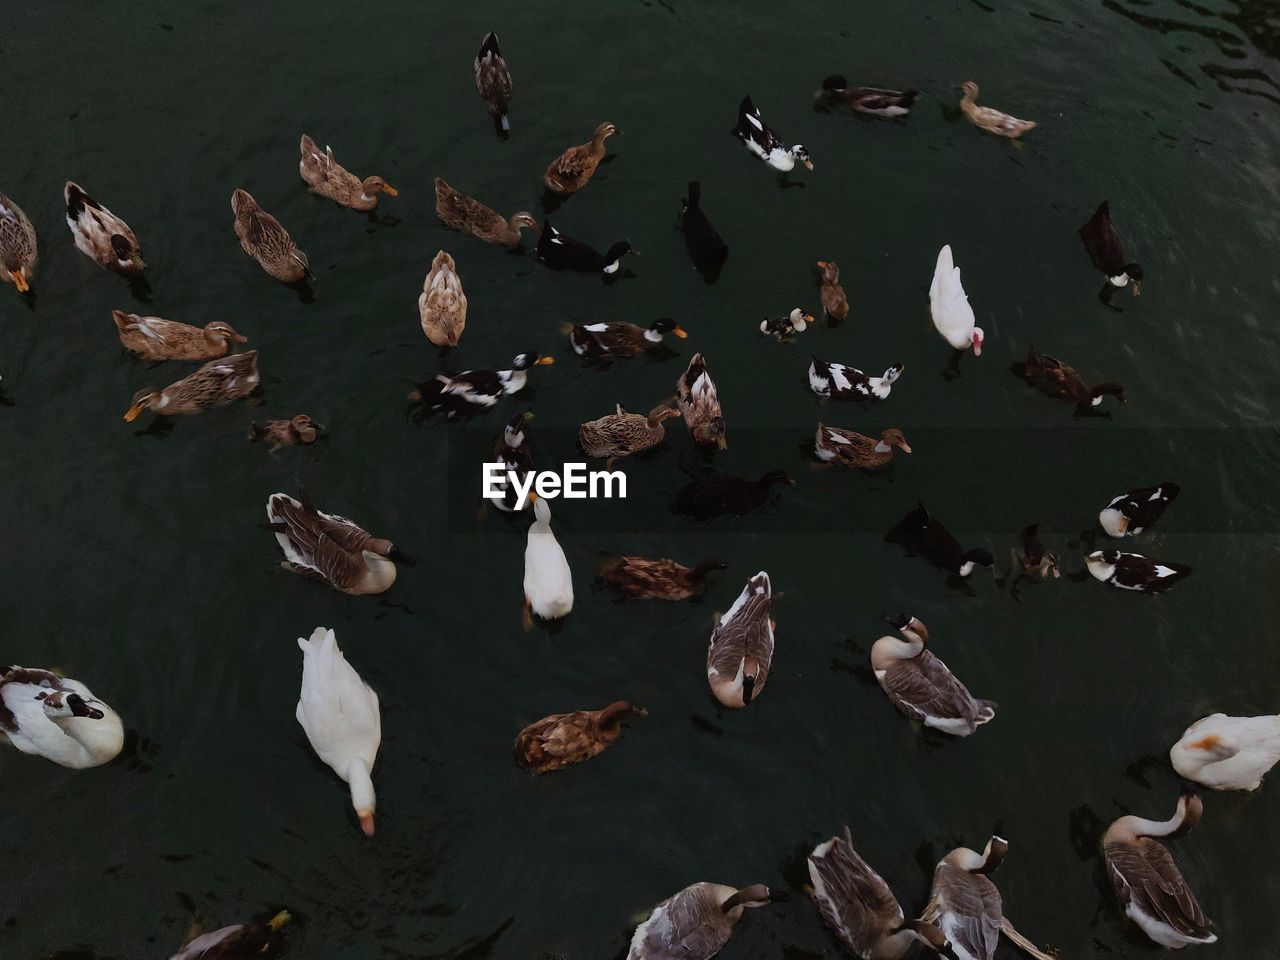 HIGH ANGLE VIEW OF DUCKS IN LAKE